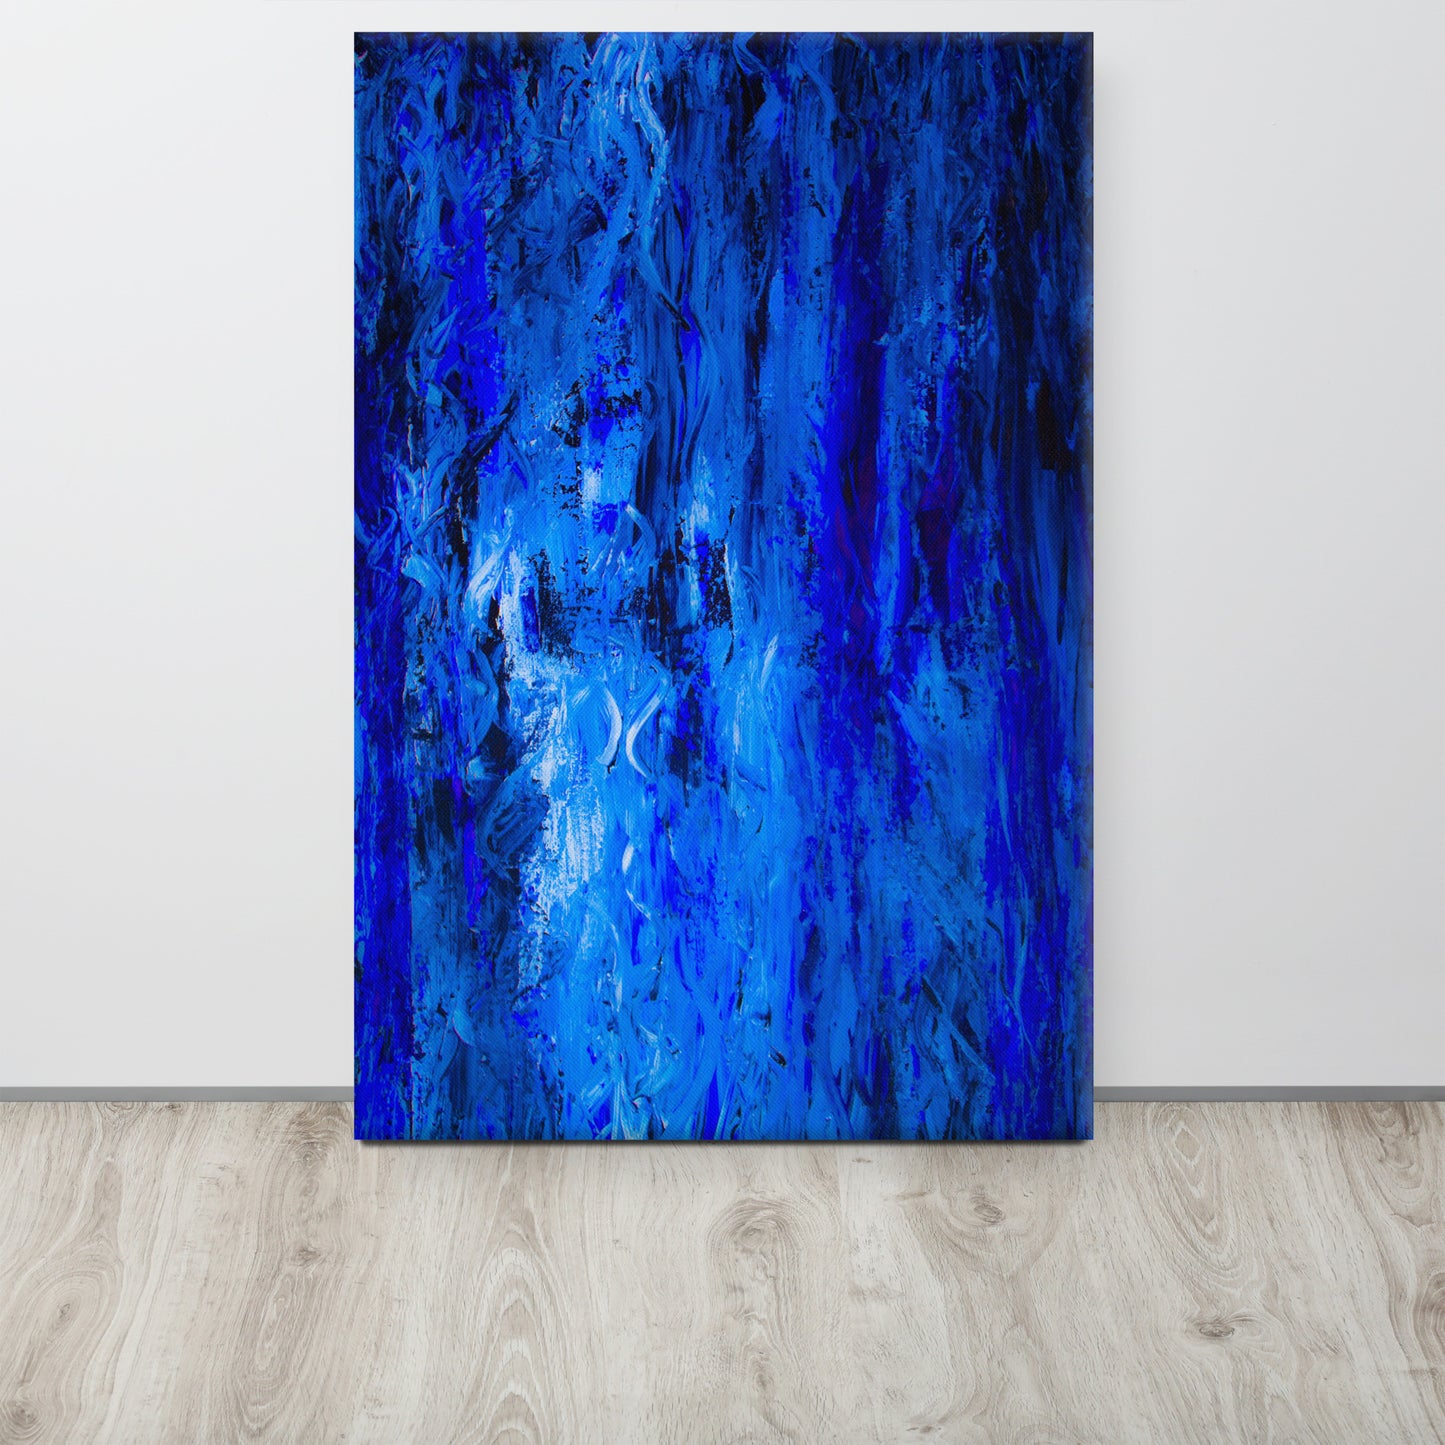 NightOwl Studio Abstract Wall Art, Blue Woods, Boho Living Room, Bedroom, Office, and Home Decor, Premium Canvas with Wooden Frame, Acrylic Painting Reproduction, 24” x 36”